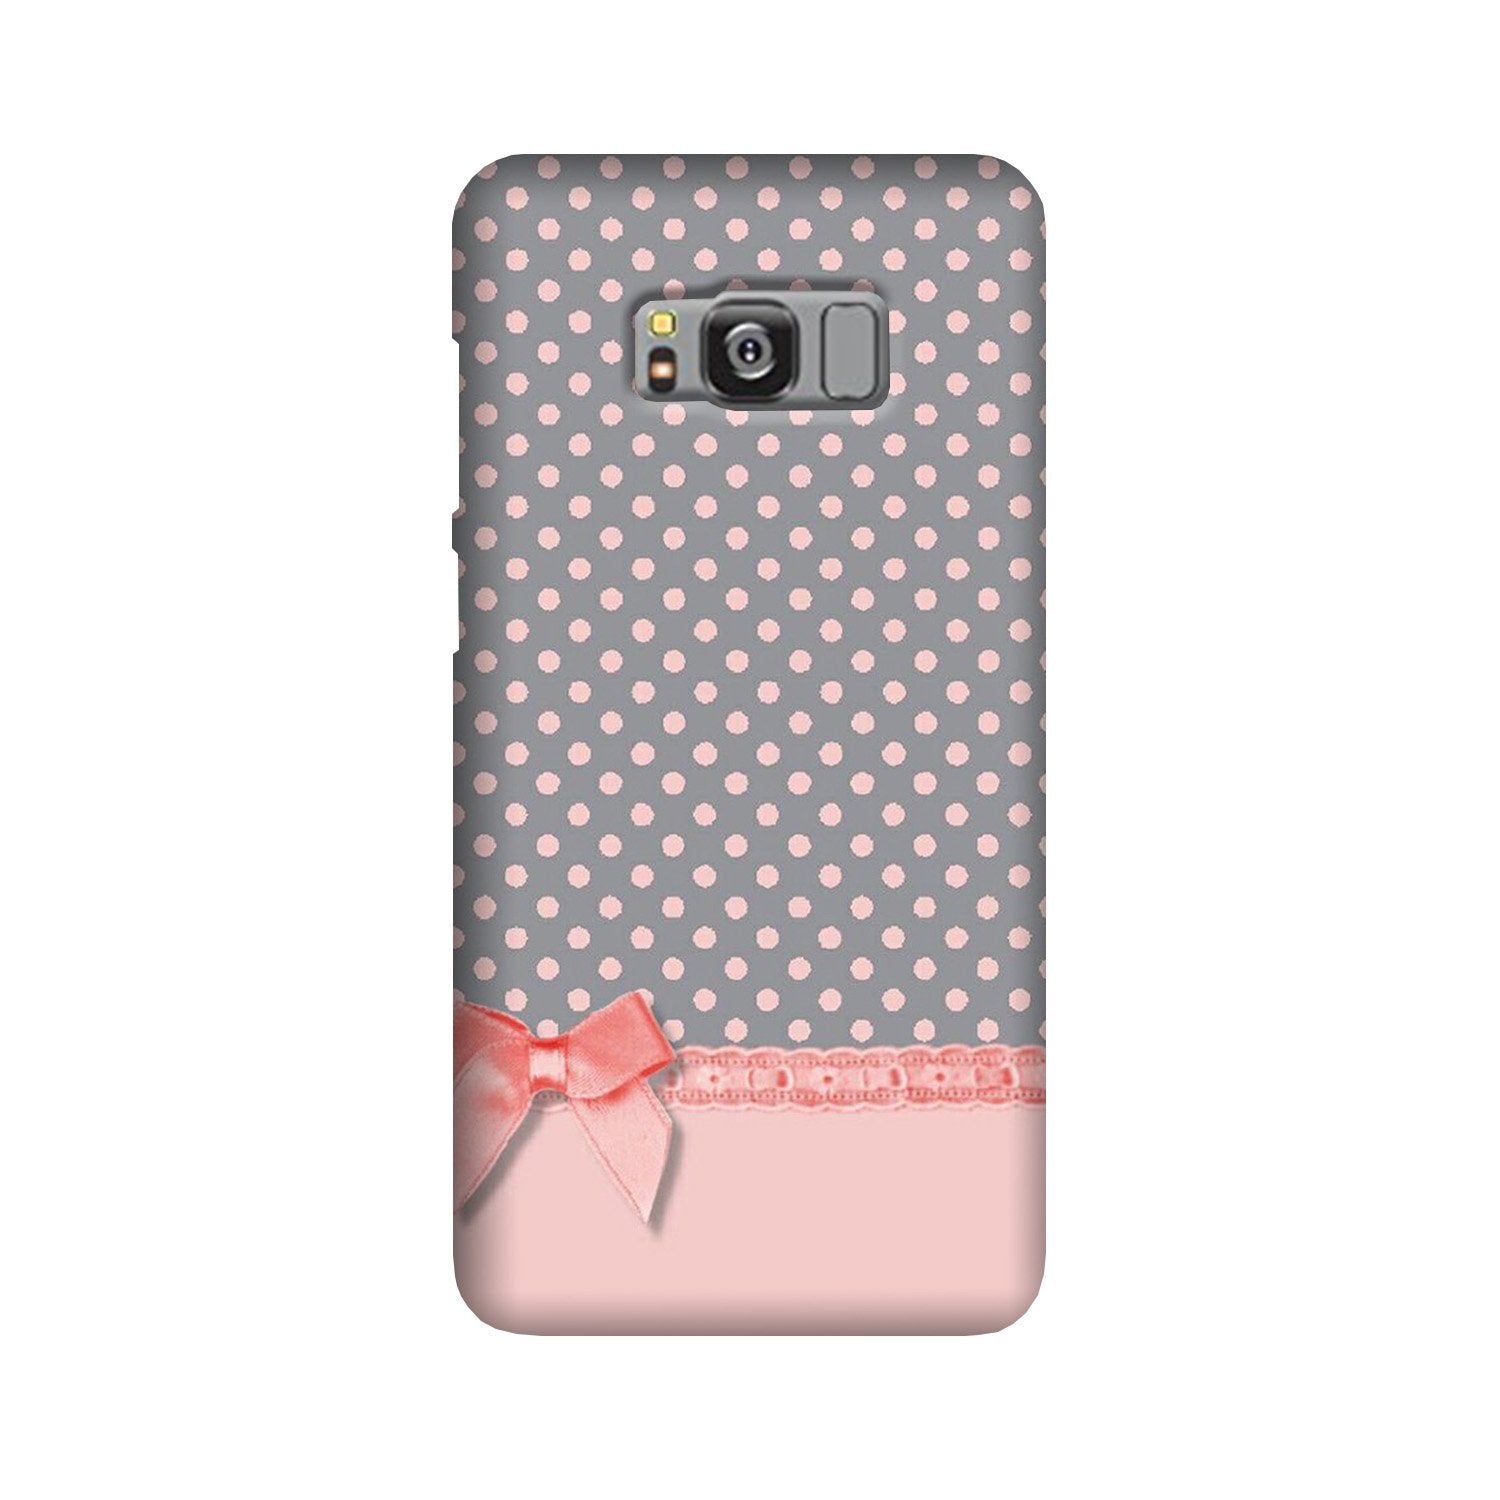 Gift Wrap2 Case for Galaxy S8